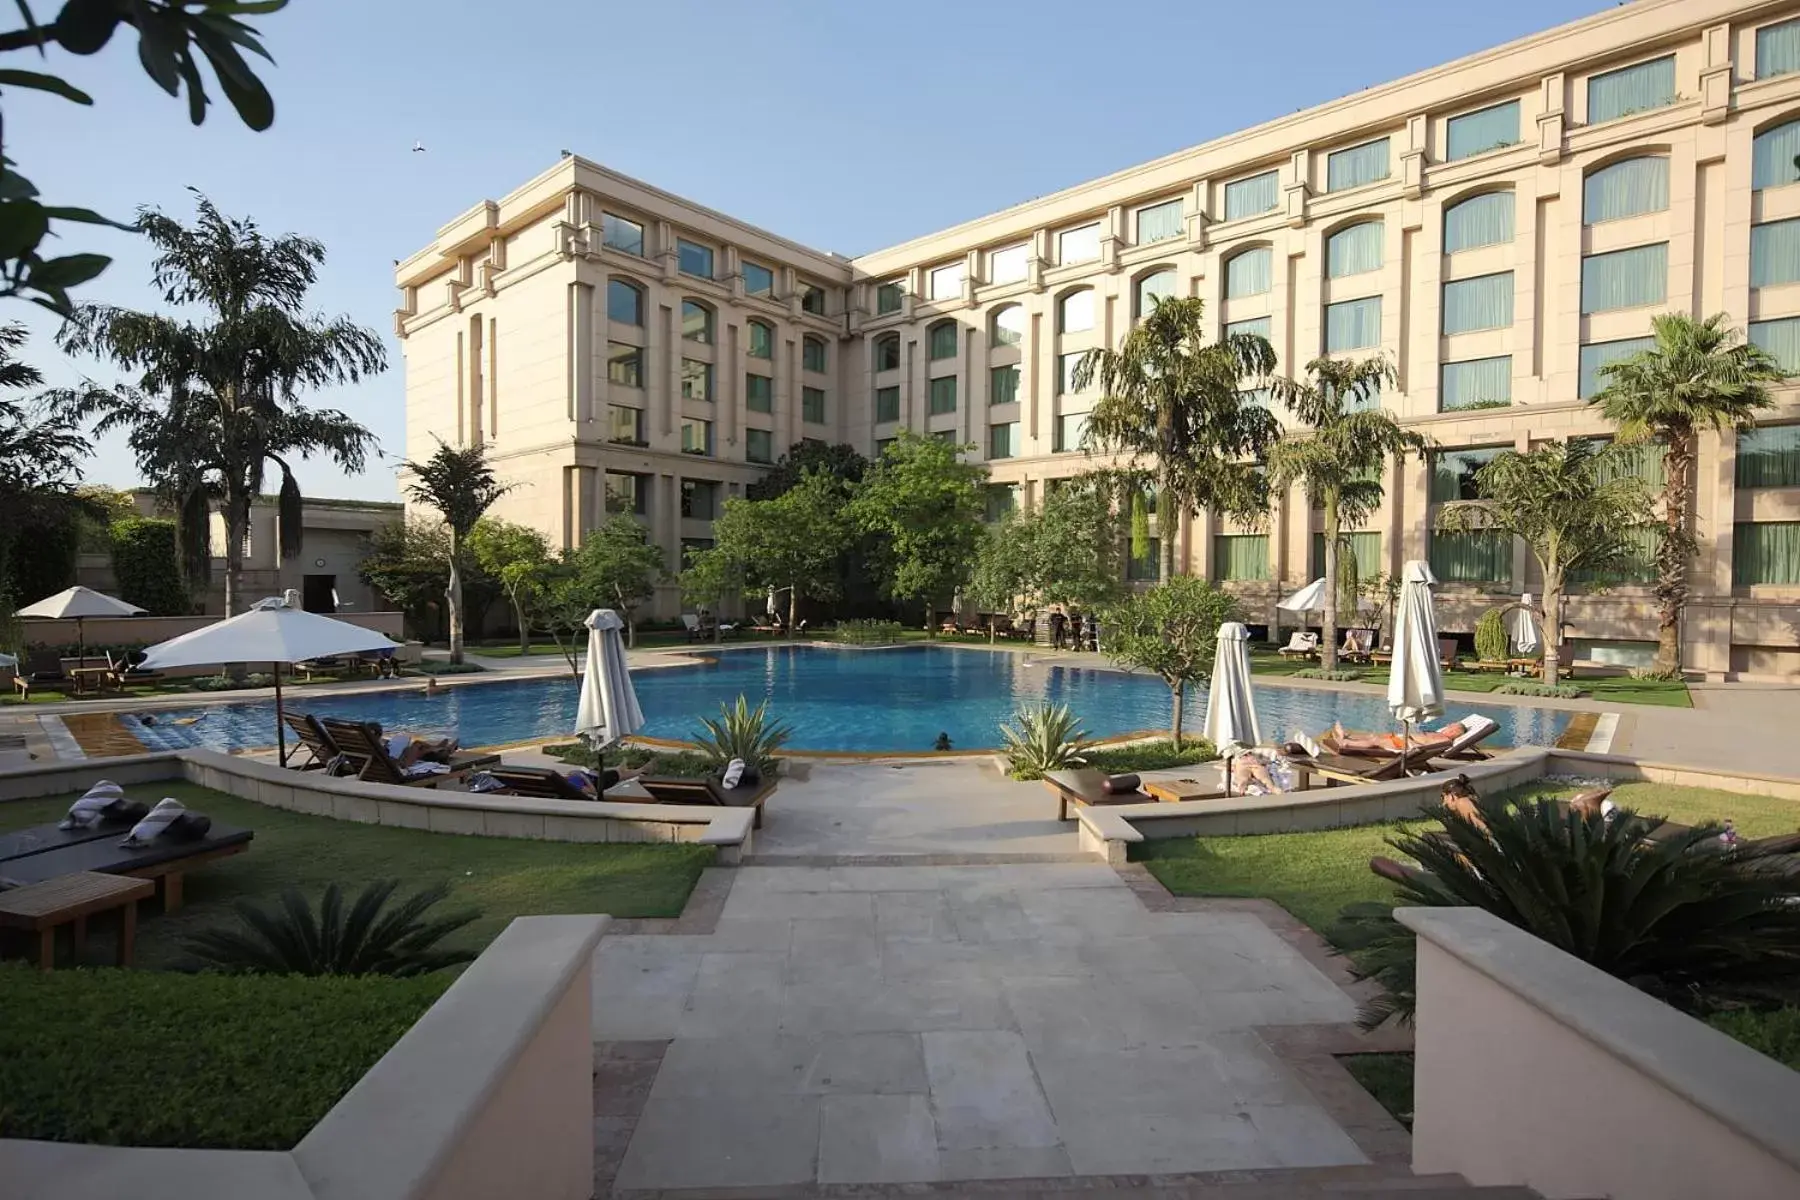 Swimming pool, Property Building in The Grand New Delhi